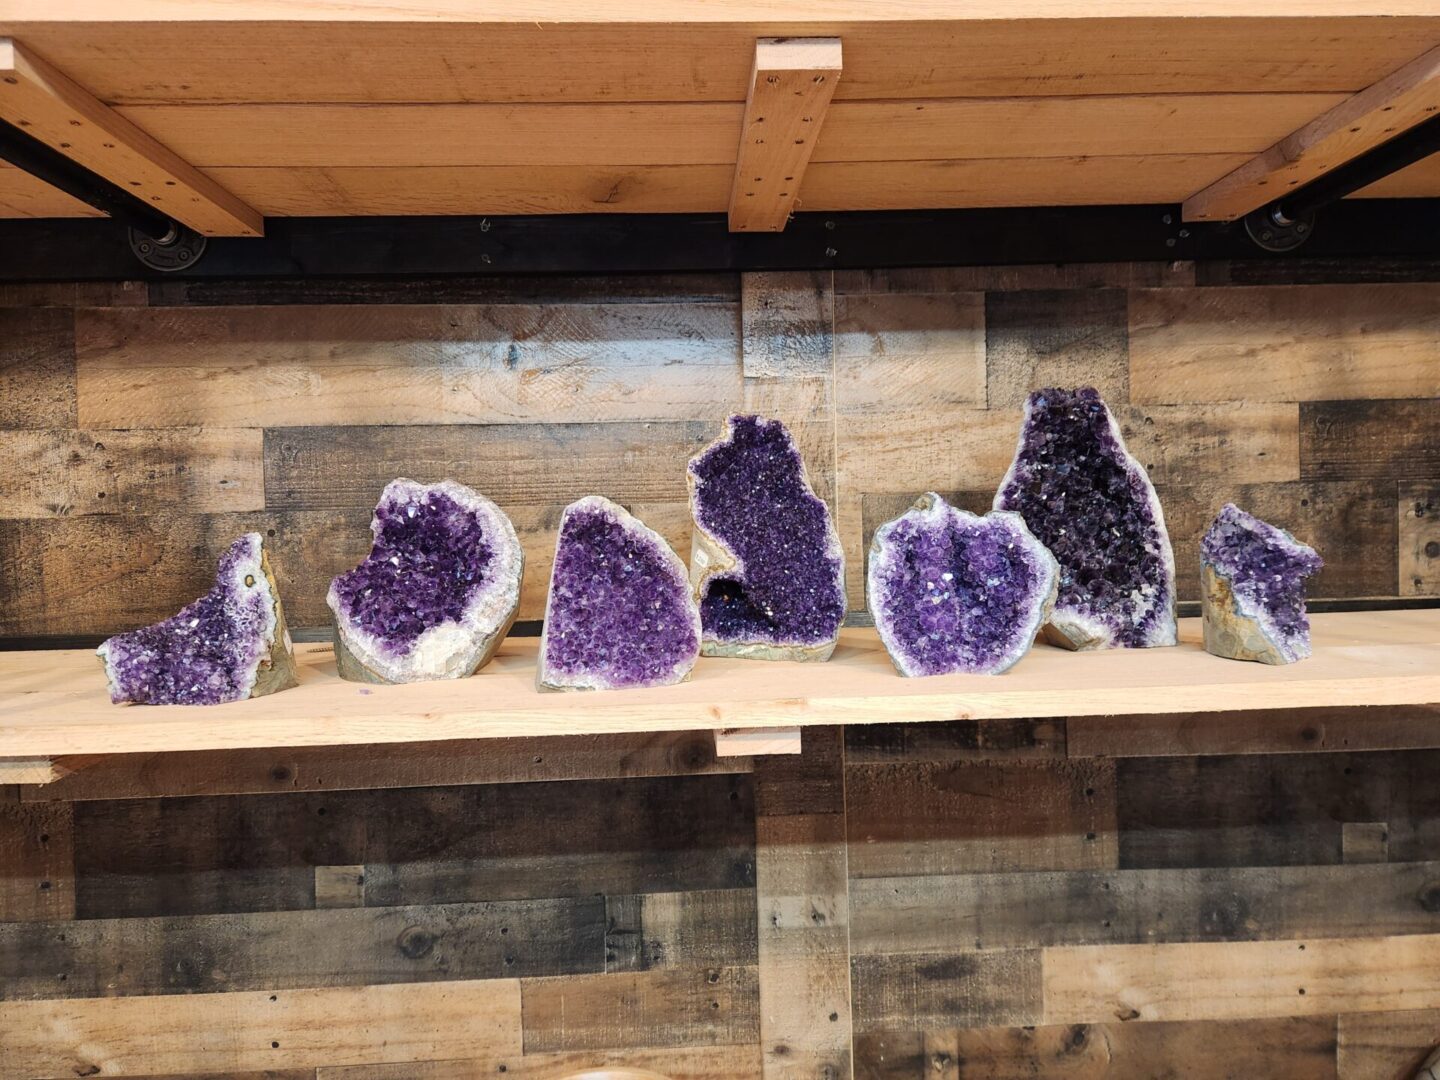 A shelf with many different types of purple rocks.